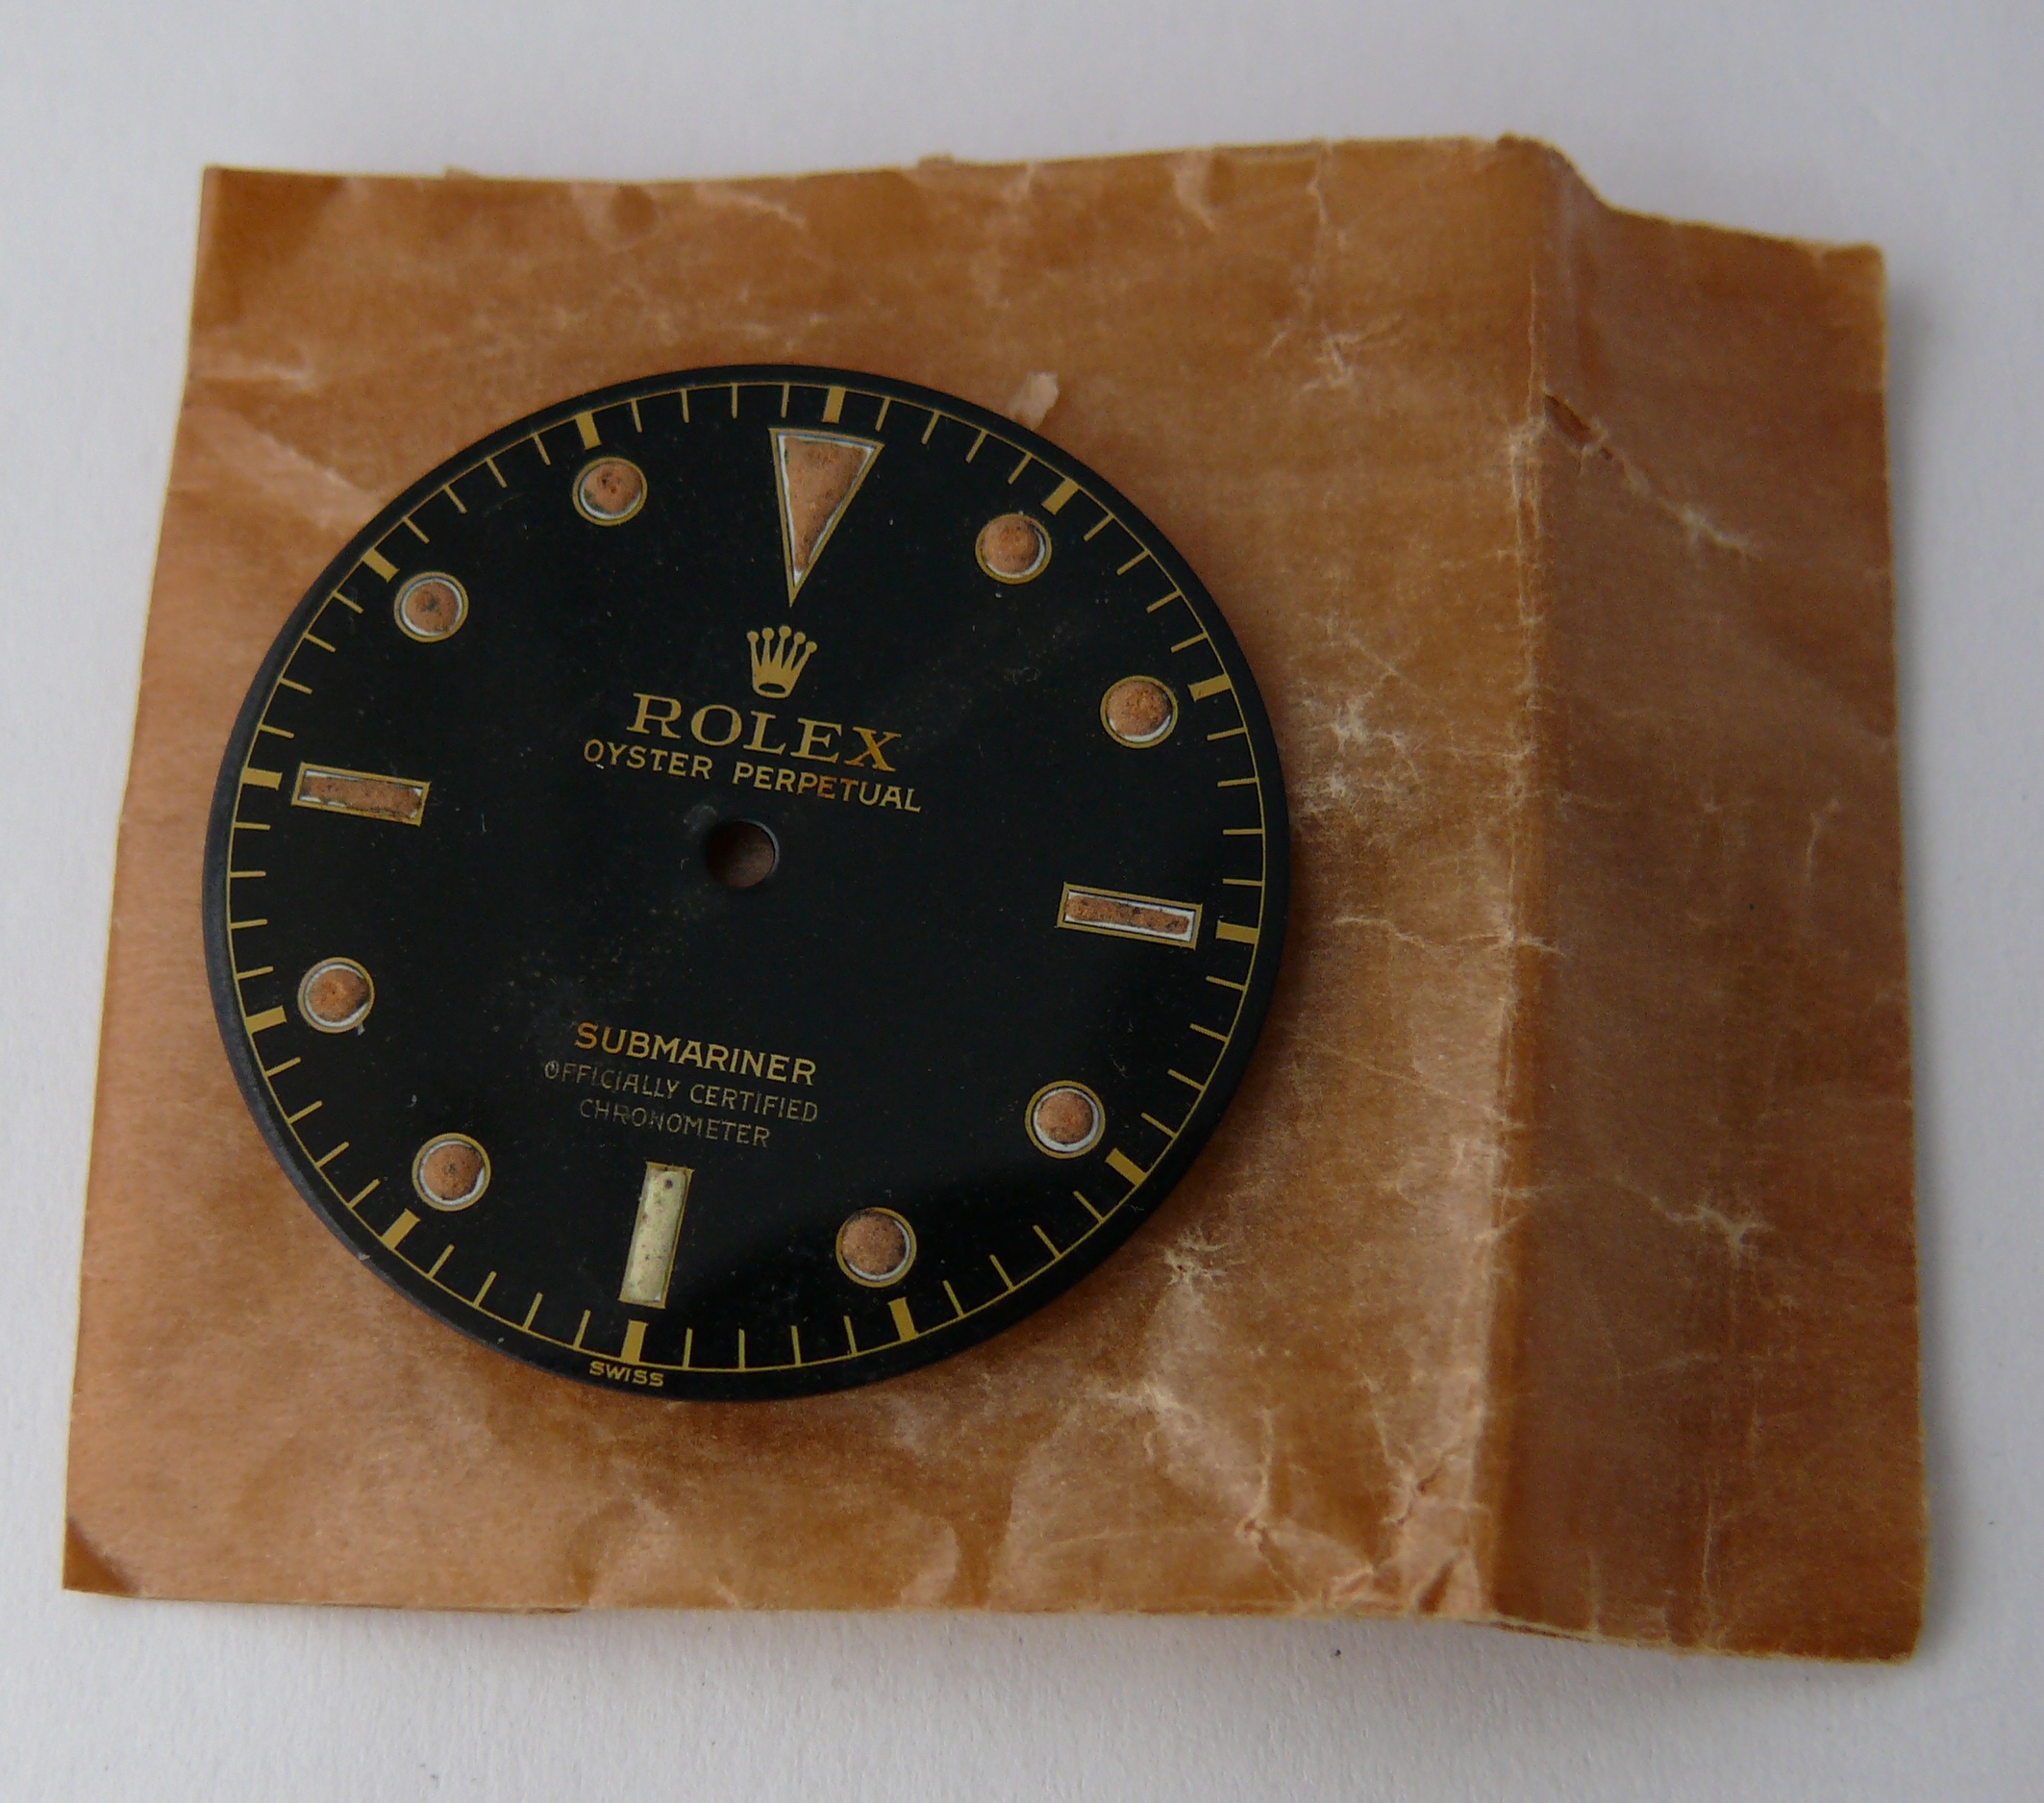 ROLEX SUBMARINER DIAL OFFICIALLY CERTIFIED CHRONOMETER REF 5508 CIRCA 1950s, gloss dial with gilt - Image 8 of 9